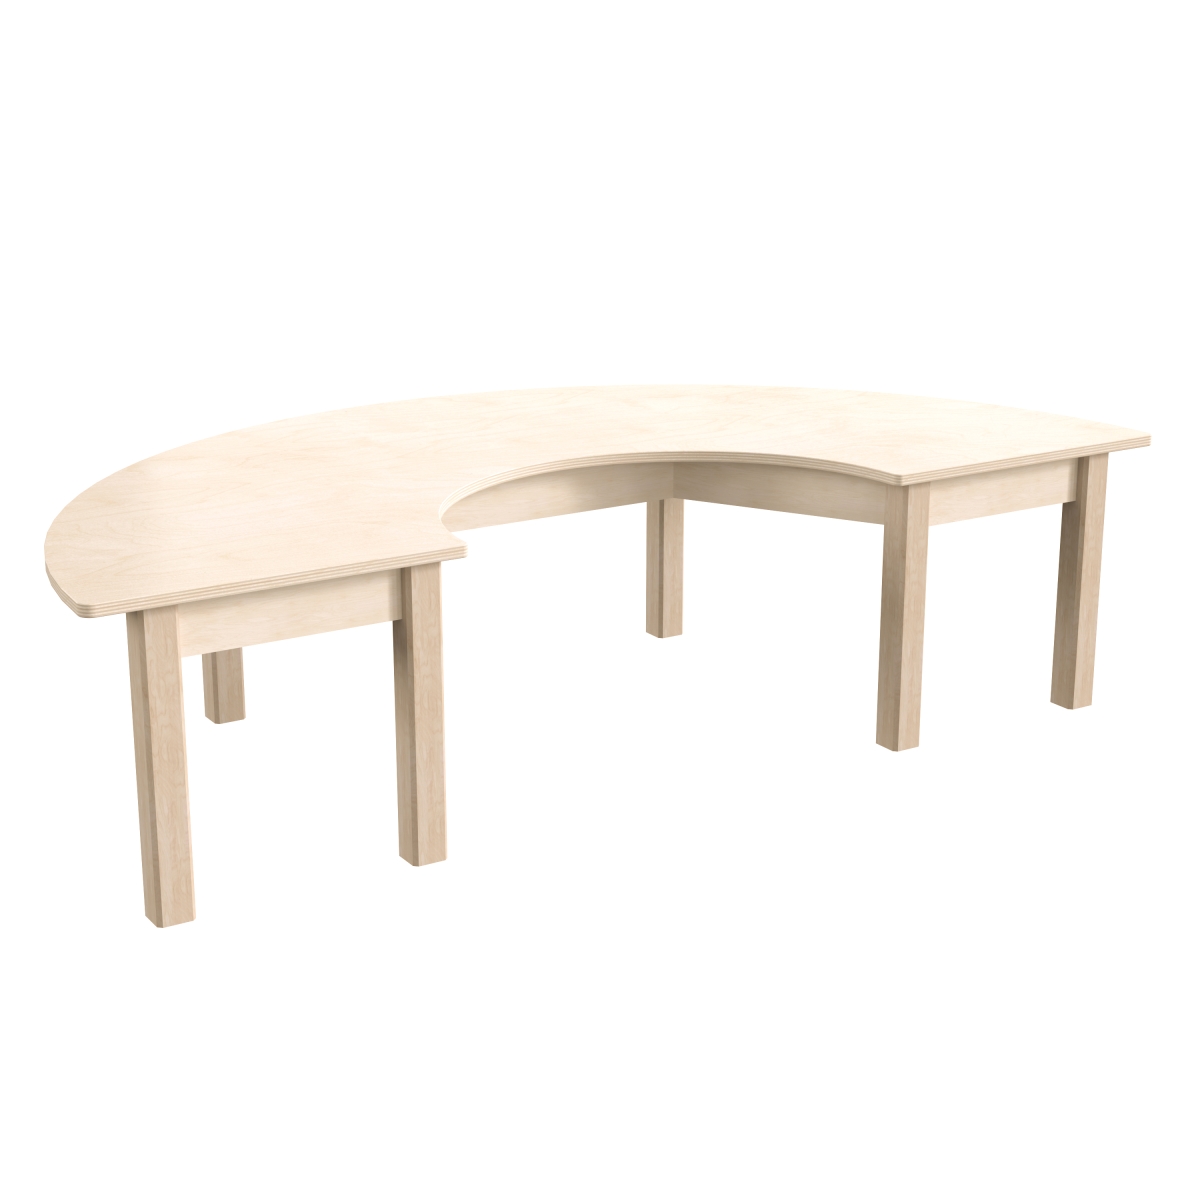 Picture of Flash Furniture MK-ME088013-GG 29.5 x 59 x 14.5 in. Bright Beginnings Commercial Grade Wooden Half Circle Preschool Classroom Activity Table, Beech